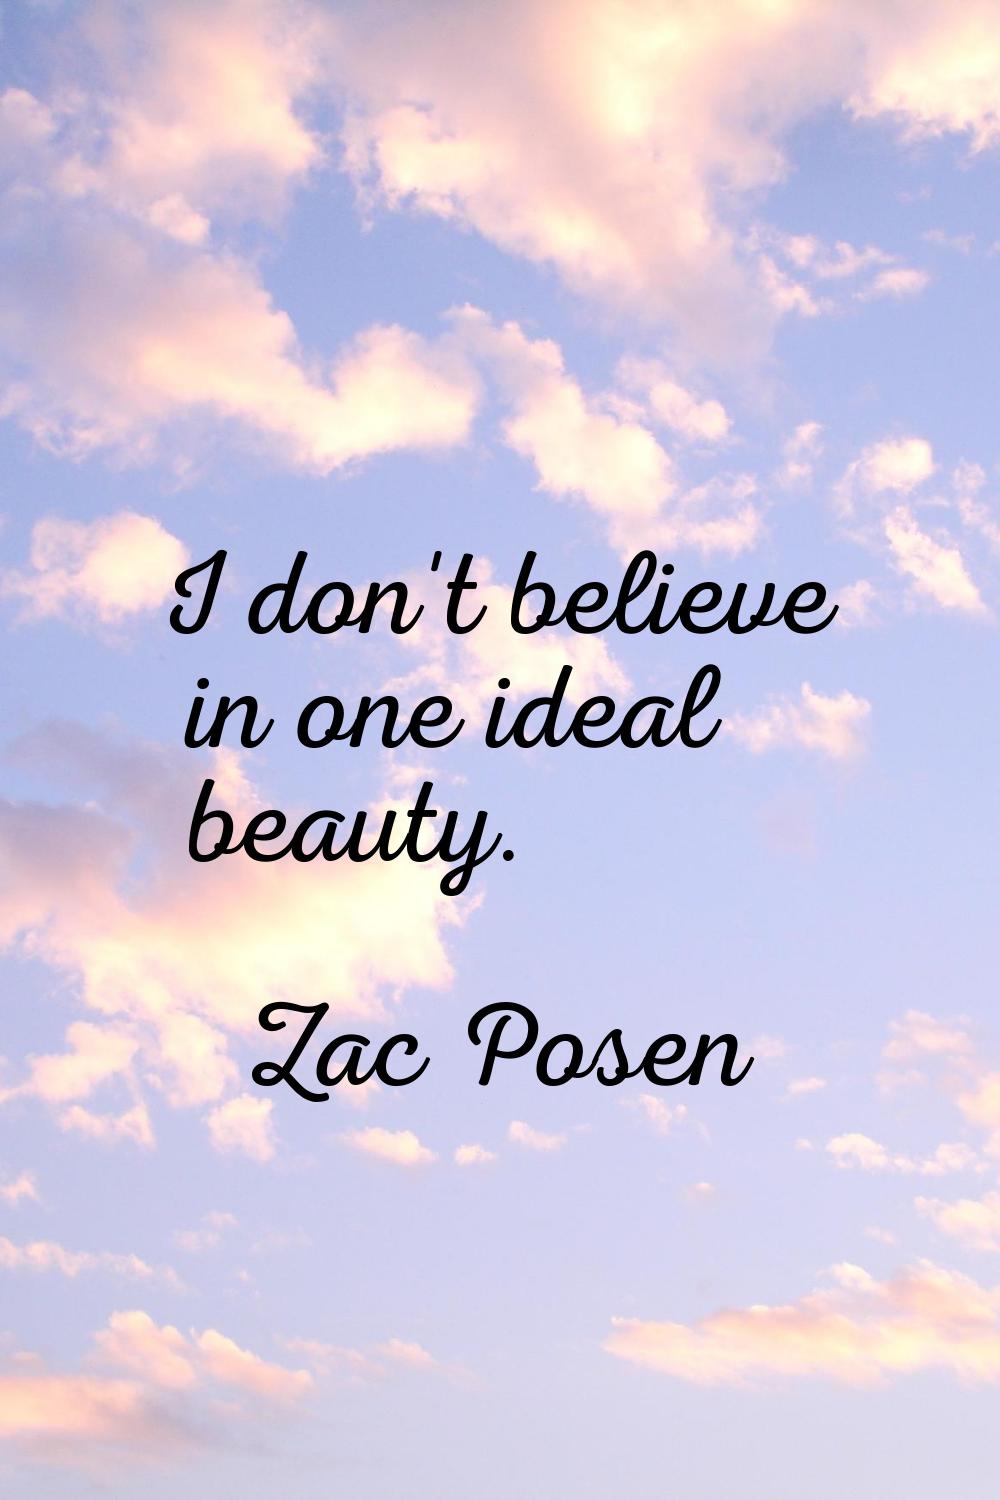 I don't believe in one ideal beauty.